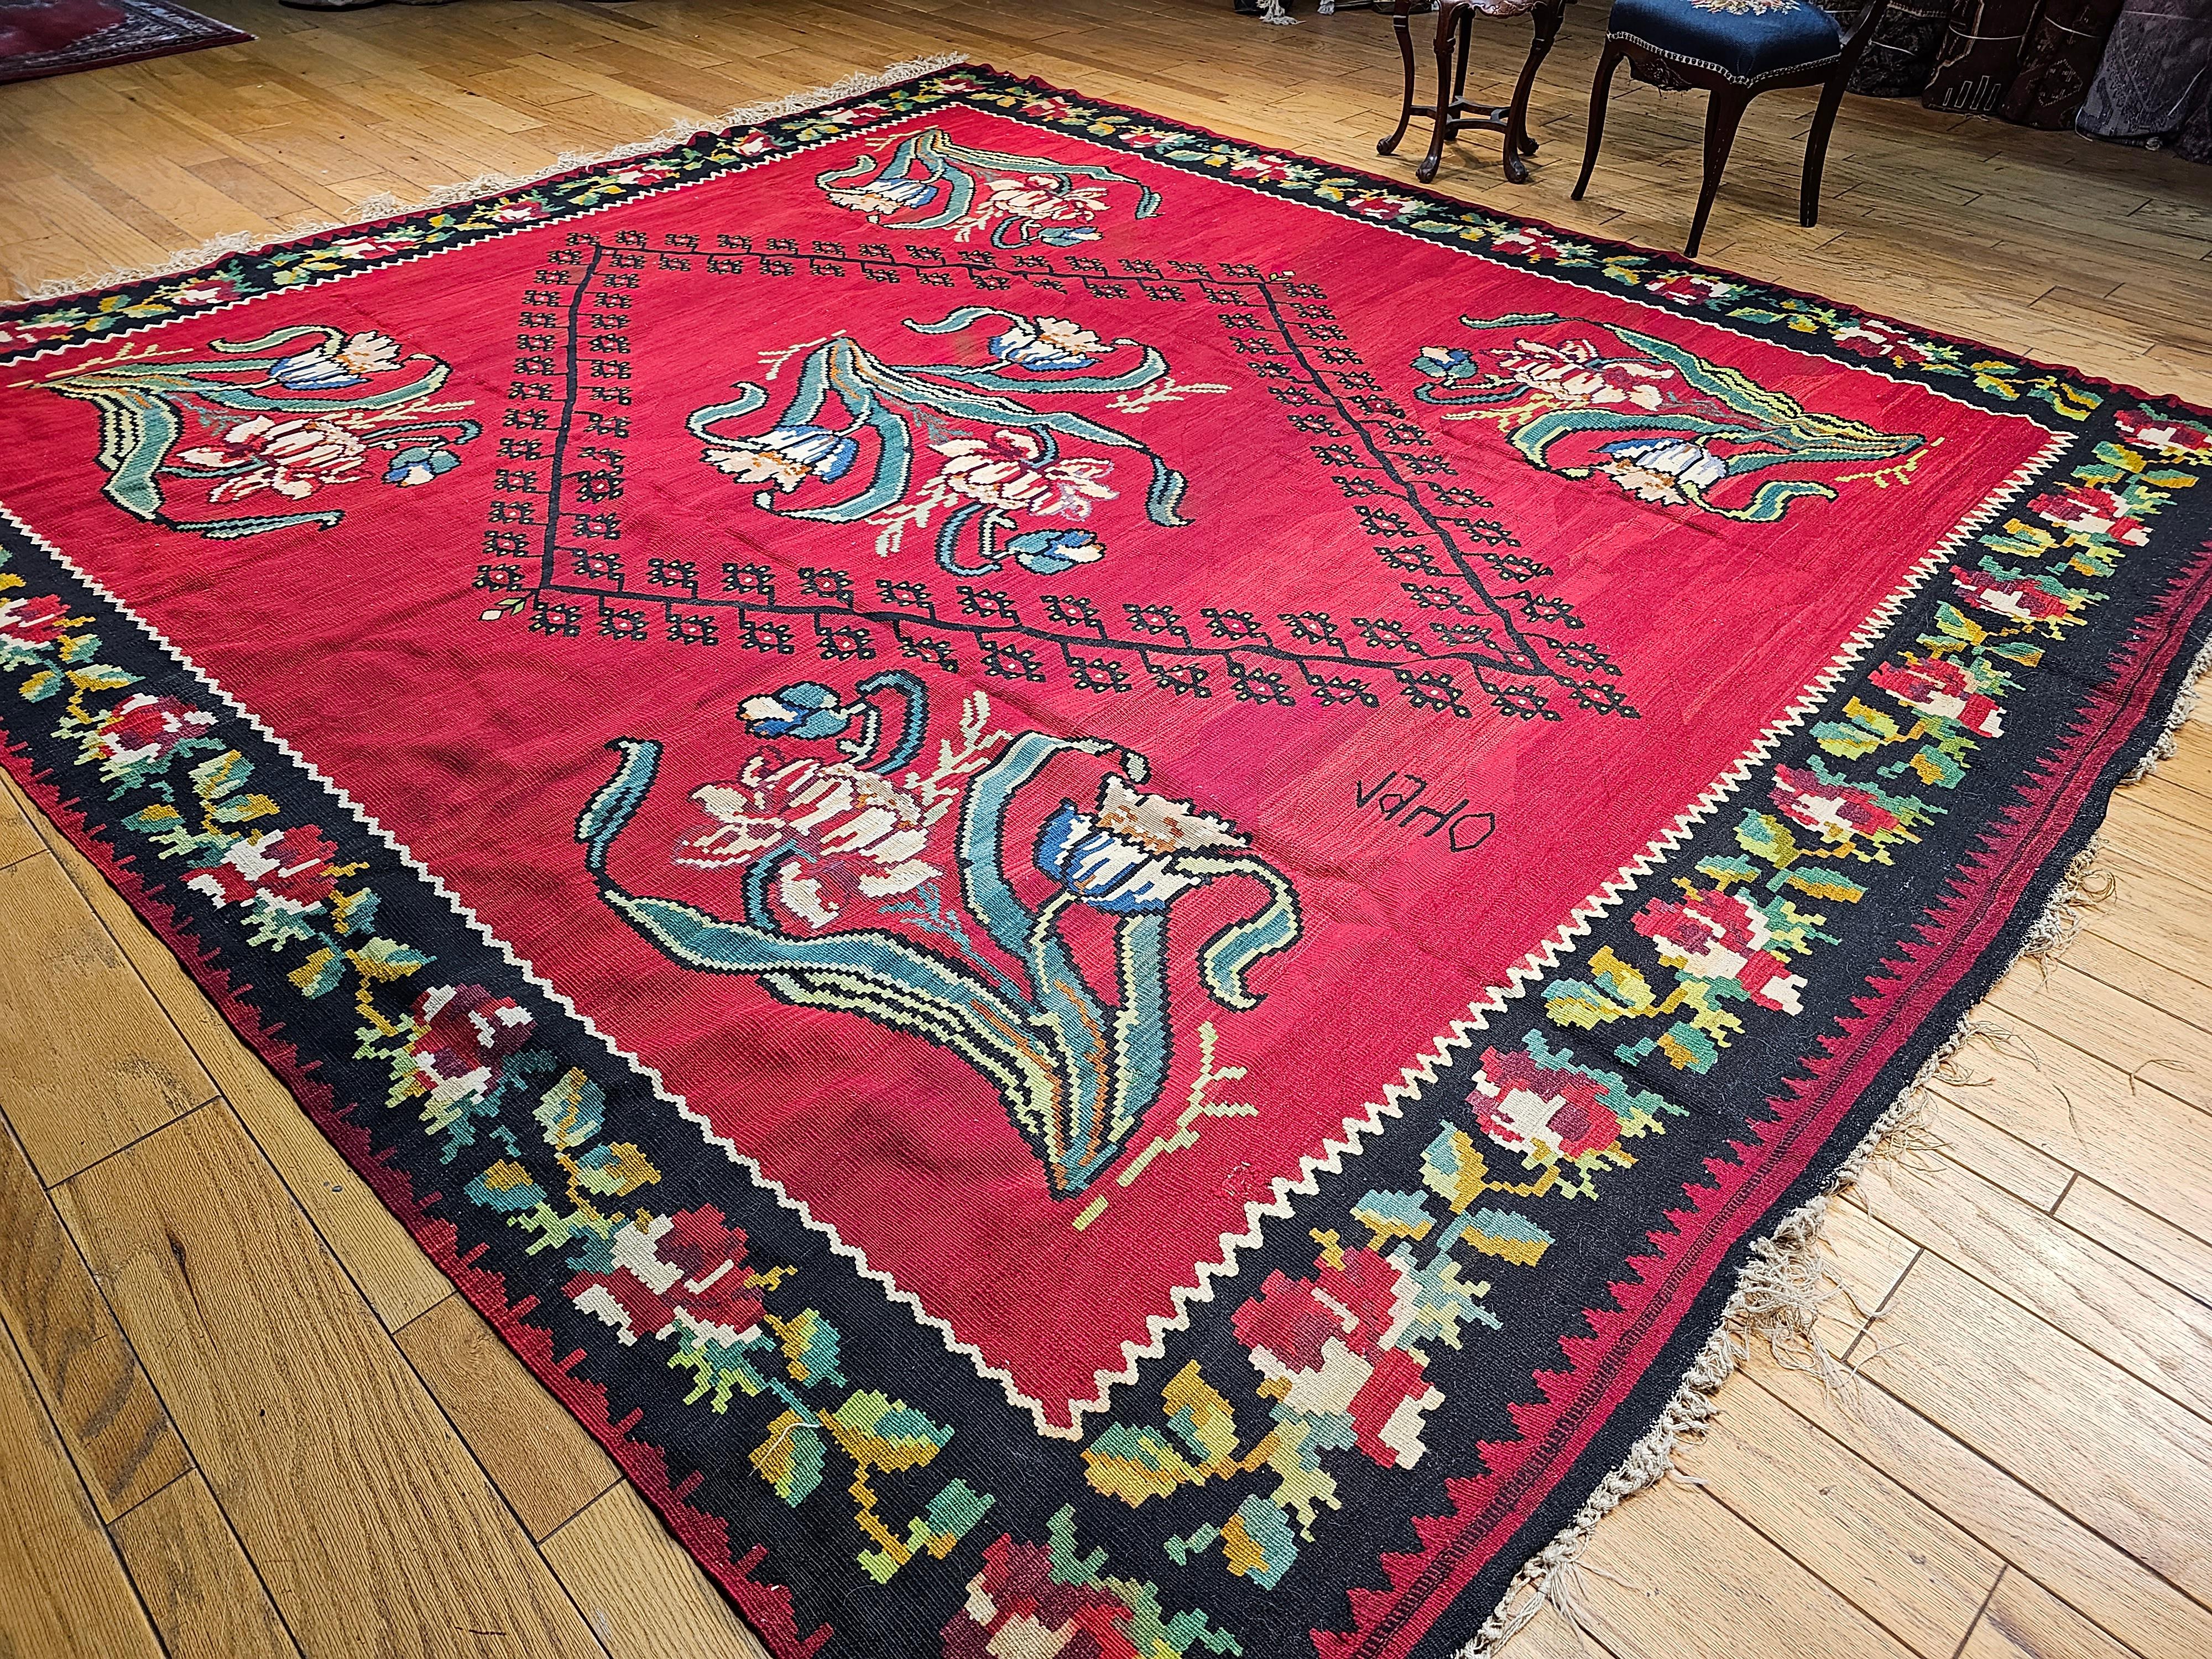 Vintage Bessarabian Kilim with Large Floral Pattern in Red, Black, Green, Blue For Sale 4